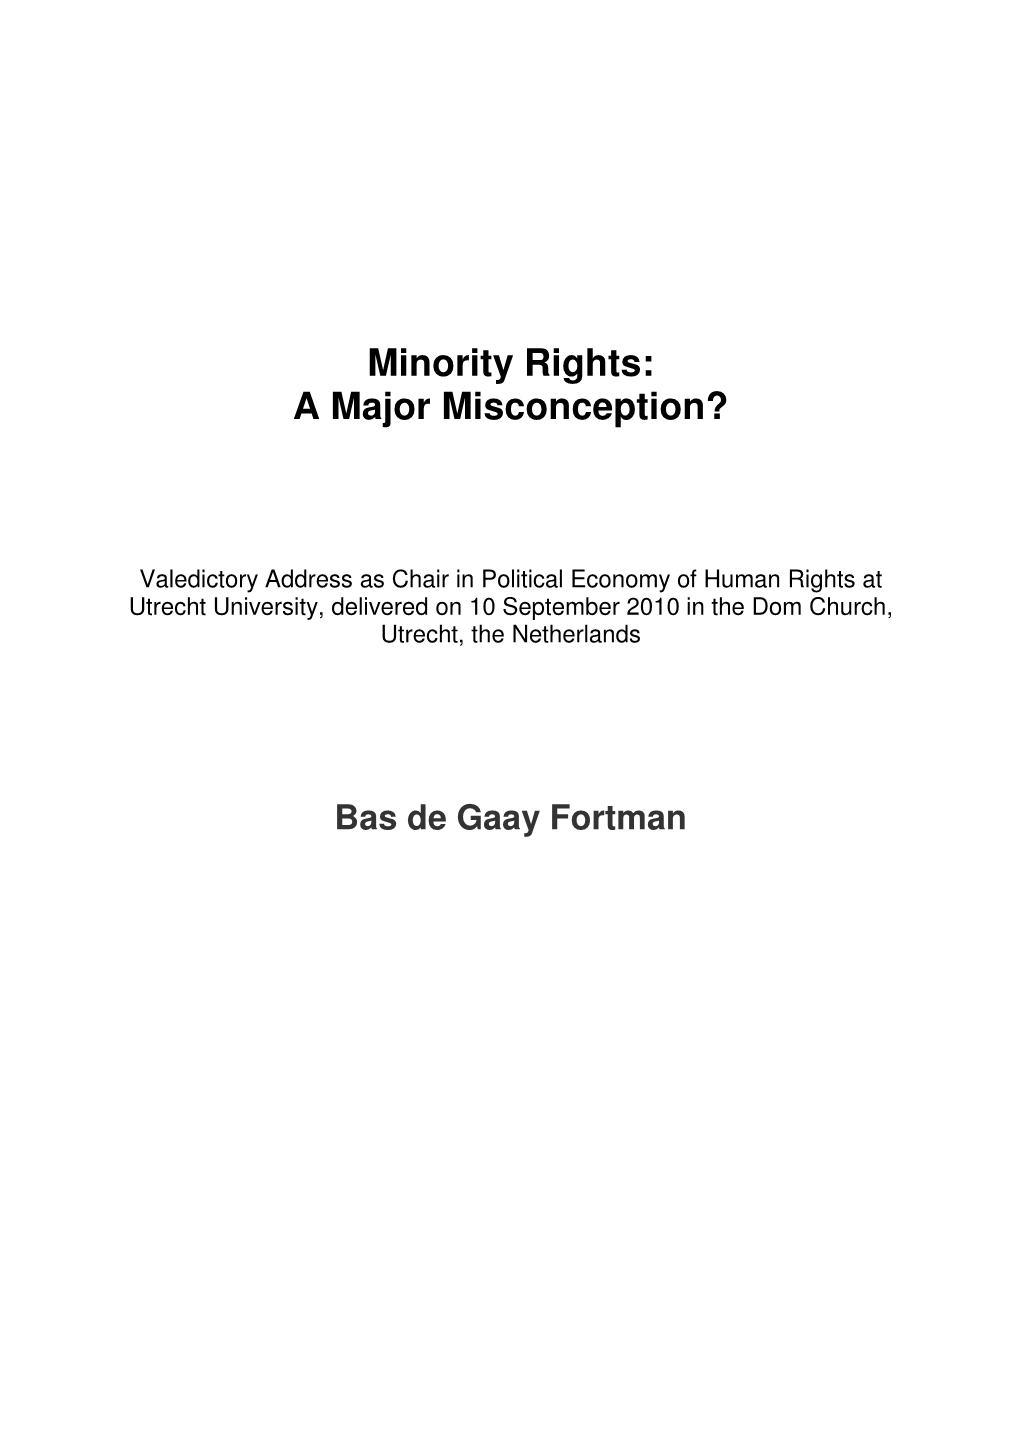 Minority Rights: a Major Misconception?